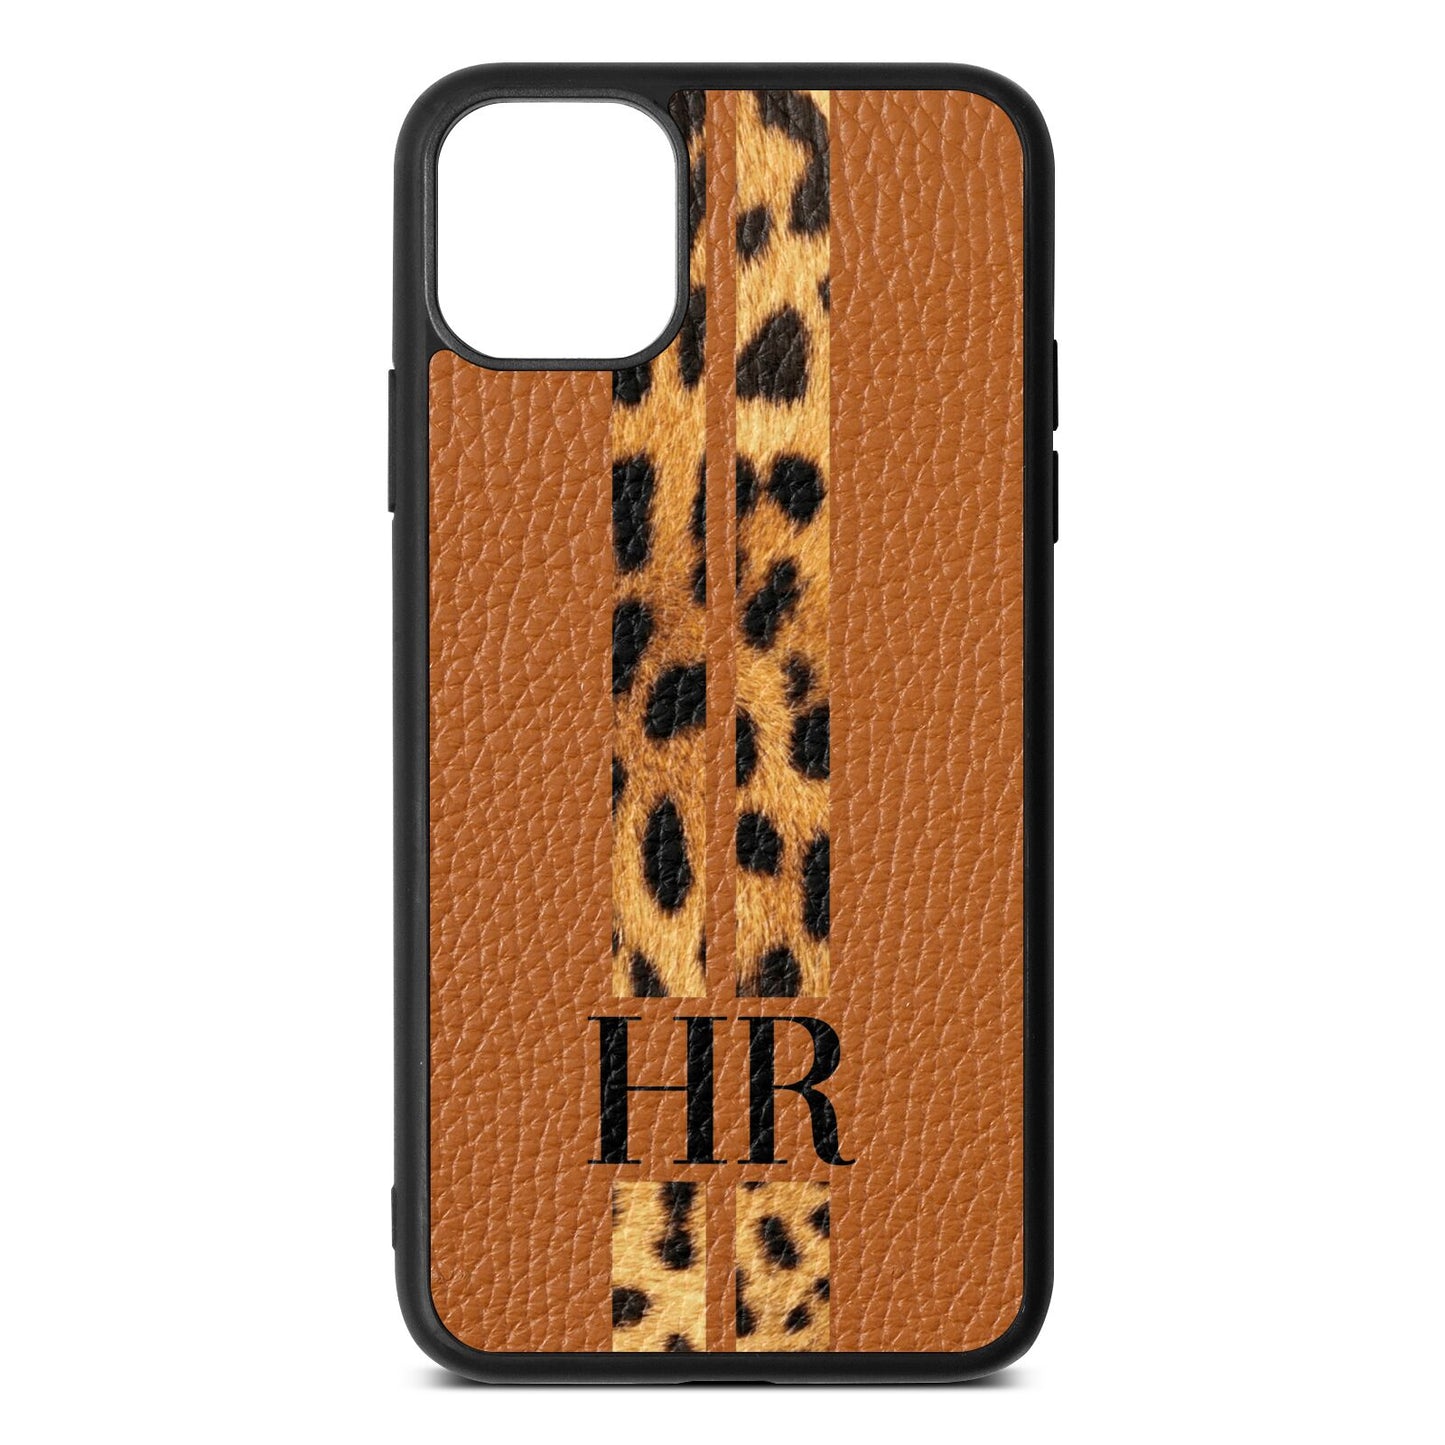 Initialled Leopard Print Stripes Tan Pebble Leather iPhone 11 Pro Max Case